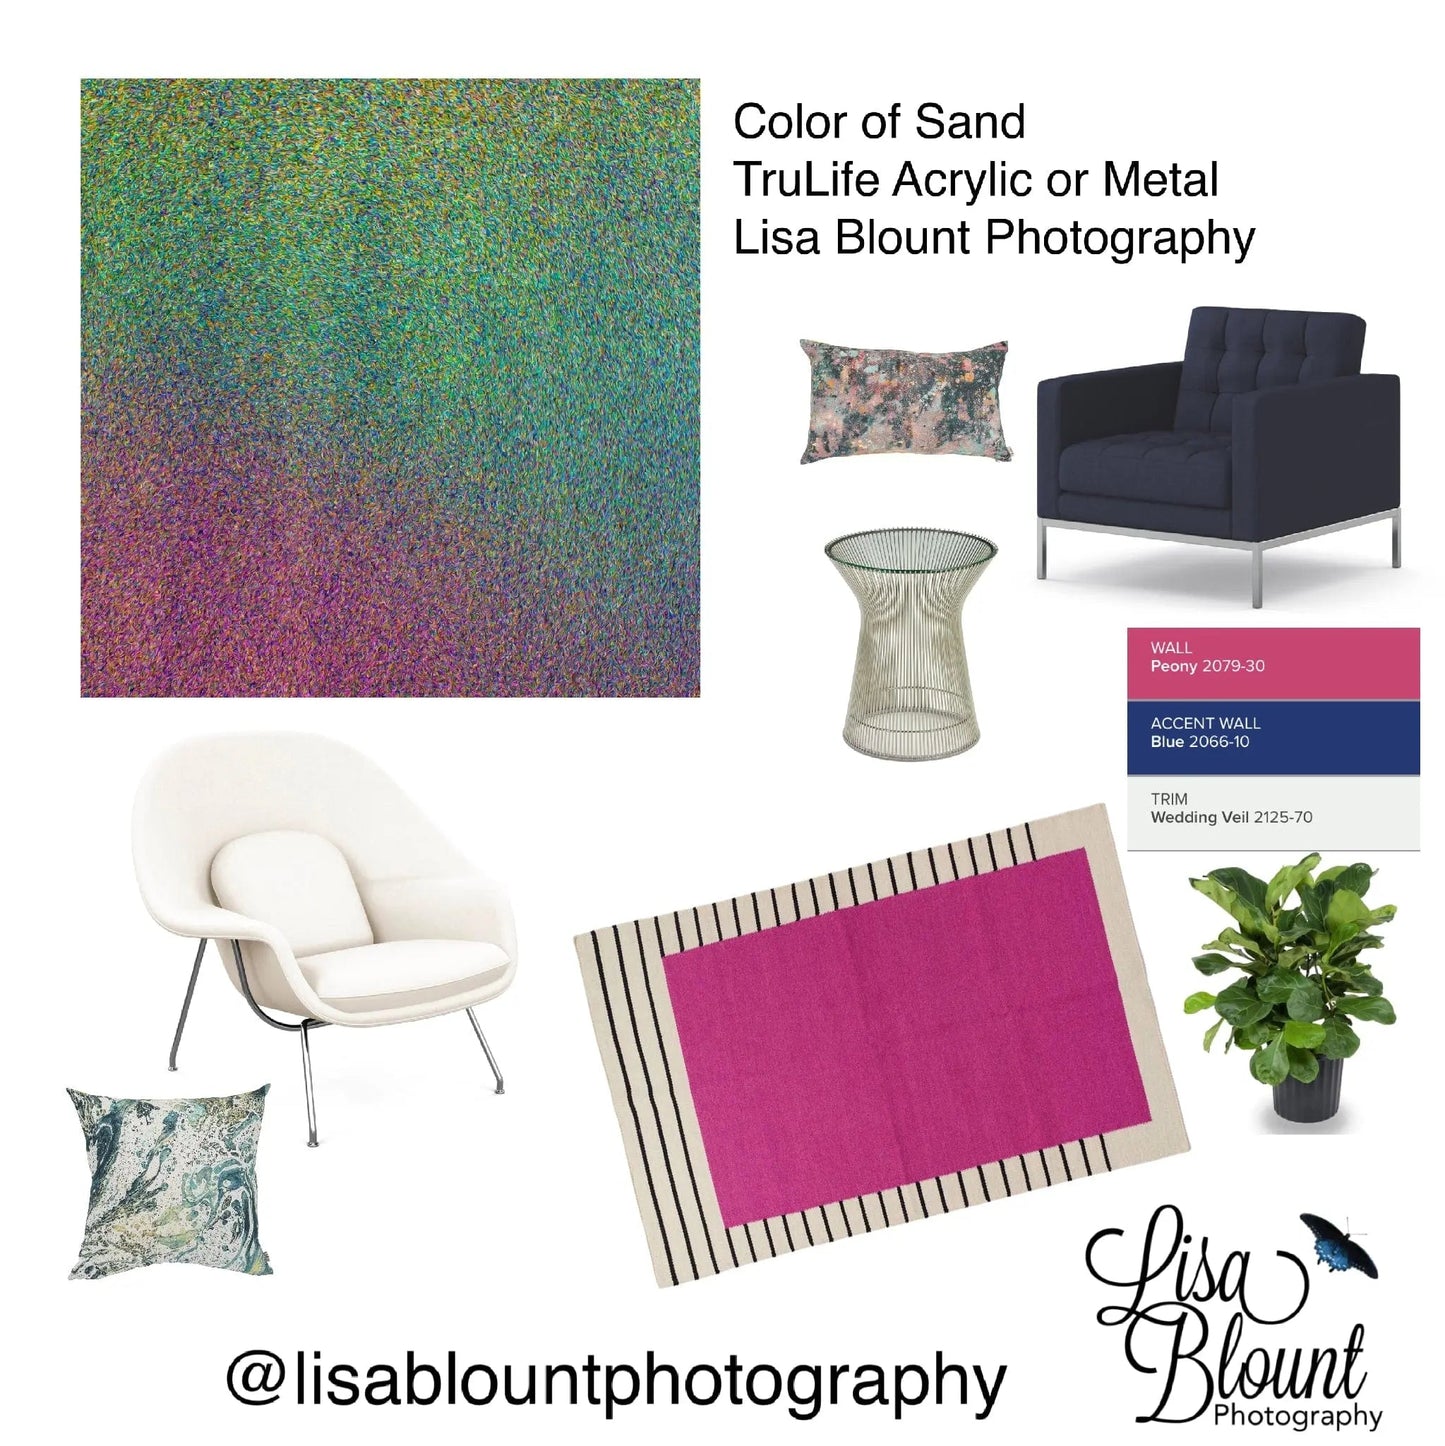 mood board focused on pinks blues white and green creating fun room decor by Lisa Blount